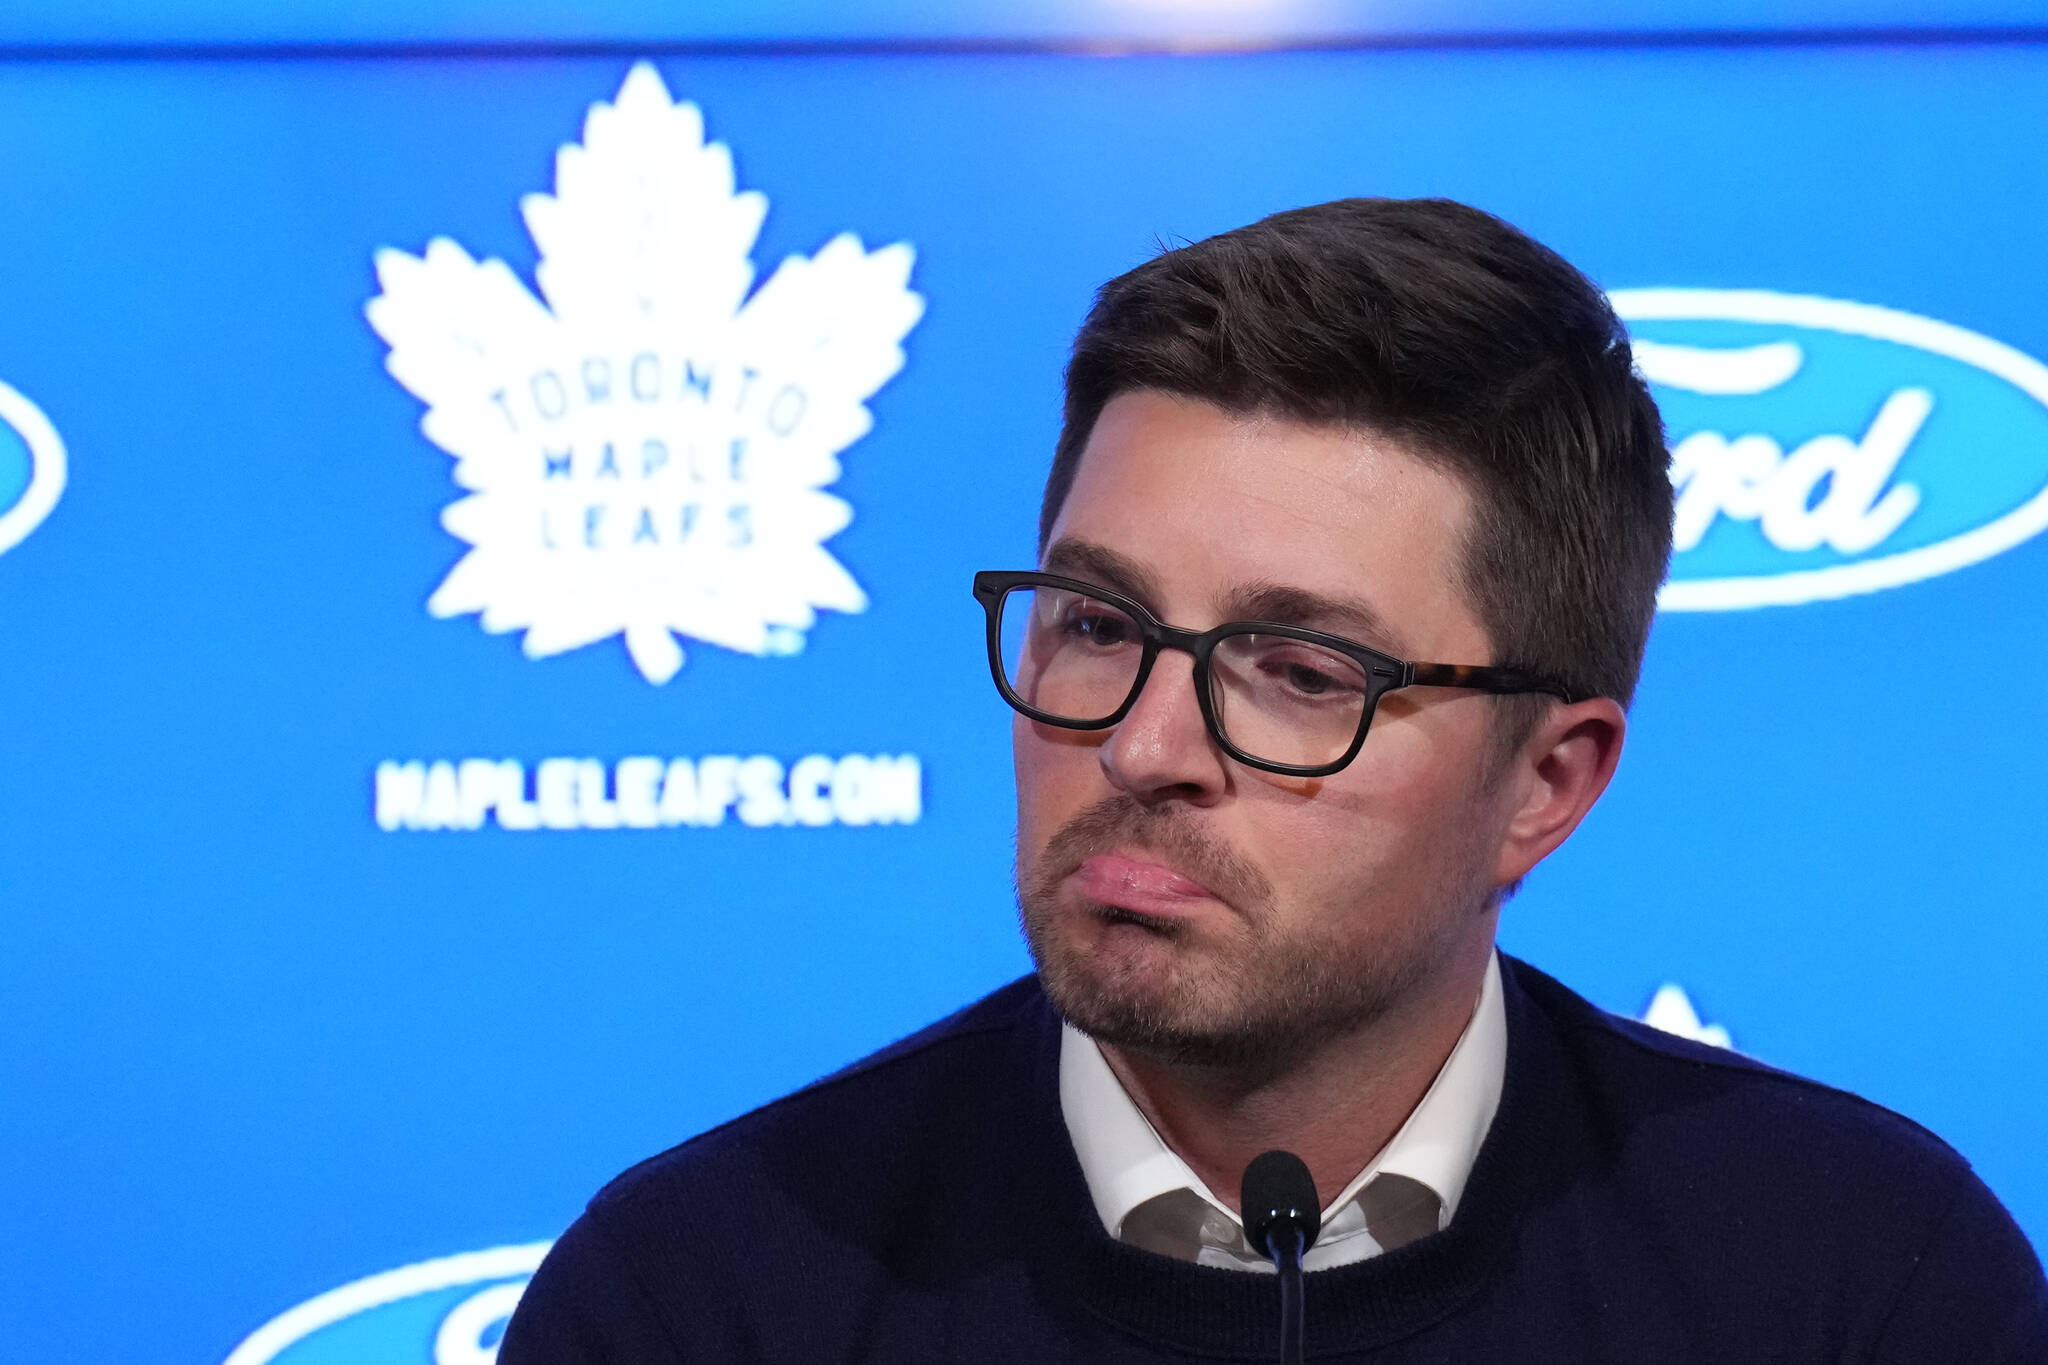 Toronto Maple Leafs: Changes in the Playoff Roster From 2019 to 2020